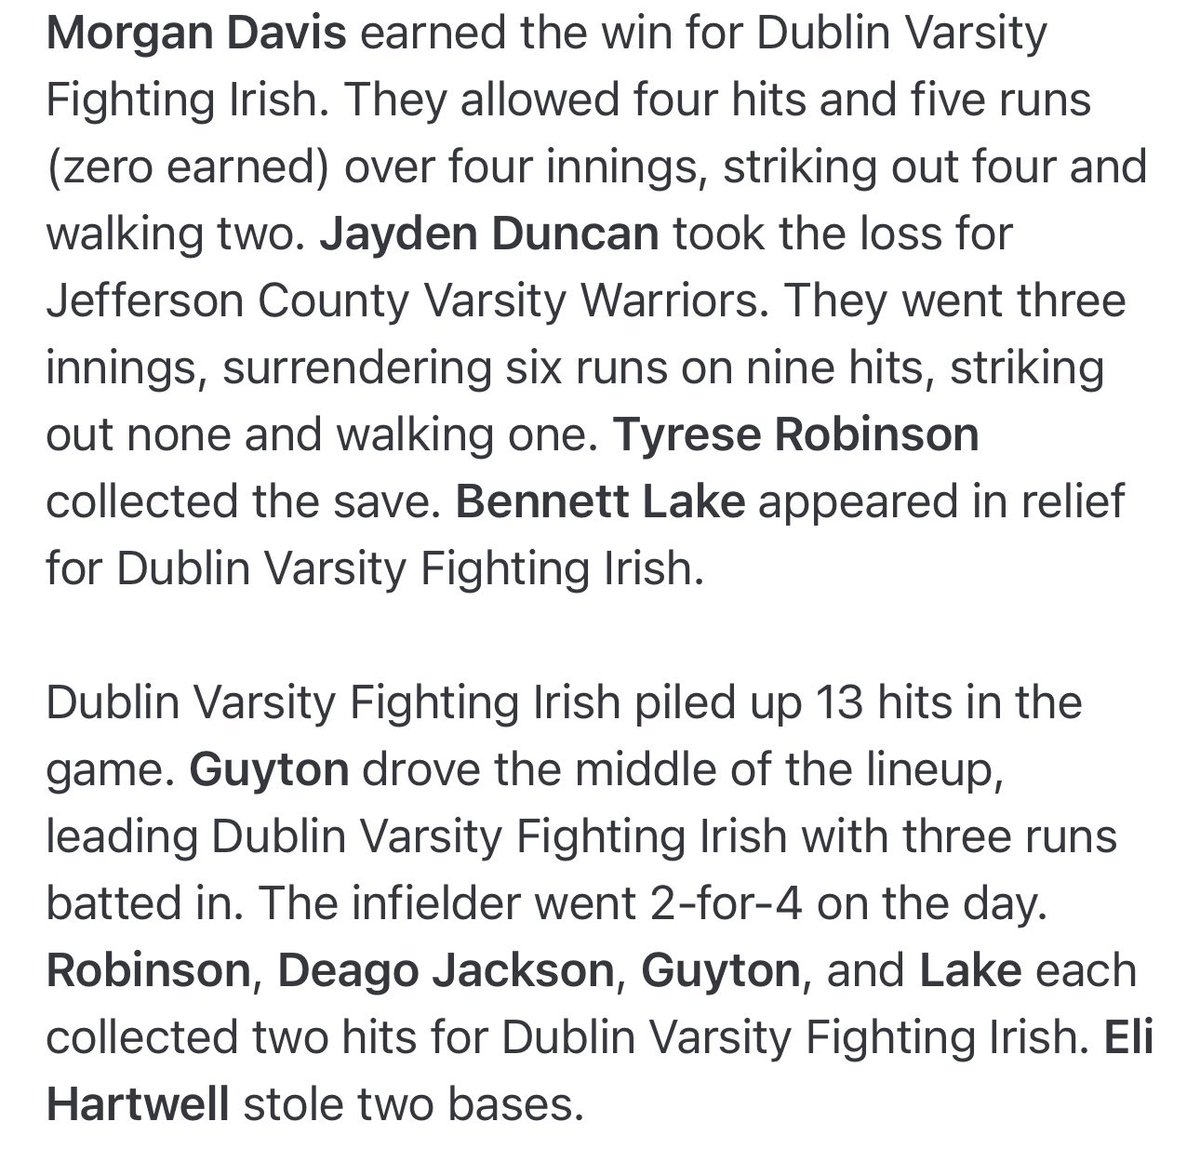 Irish win!!! Dublin holds on for an 8-7 win over Jeff Co to take the rubber game in the series. Josh Guyton had another monster game, going 2-for-4 with a HR, double, 3 RBI and 1 run. Dublin returns to action next week, when they host Bleckley Tuesday at 5:30 p.m. #GoIrish ☘️